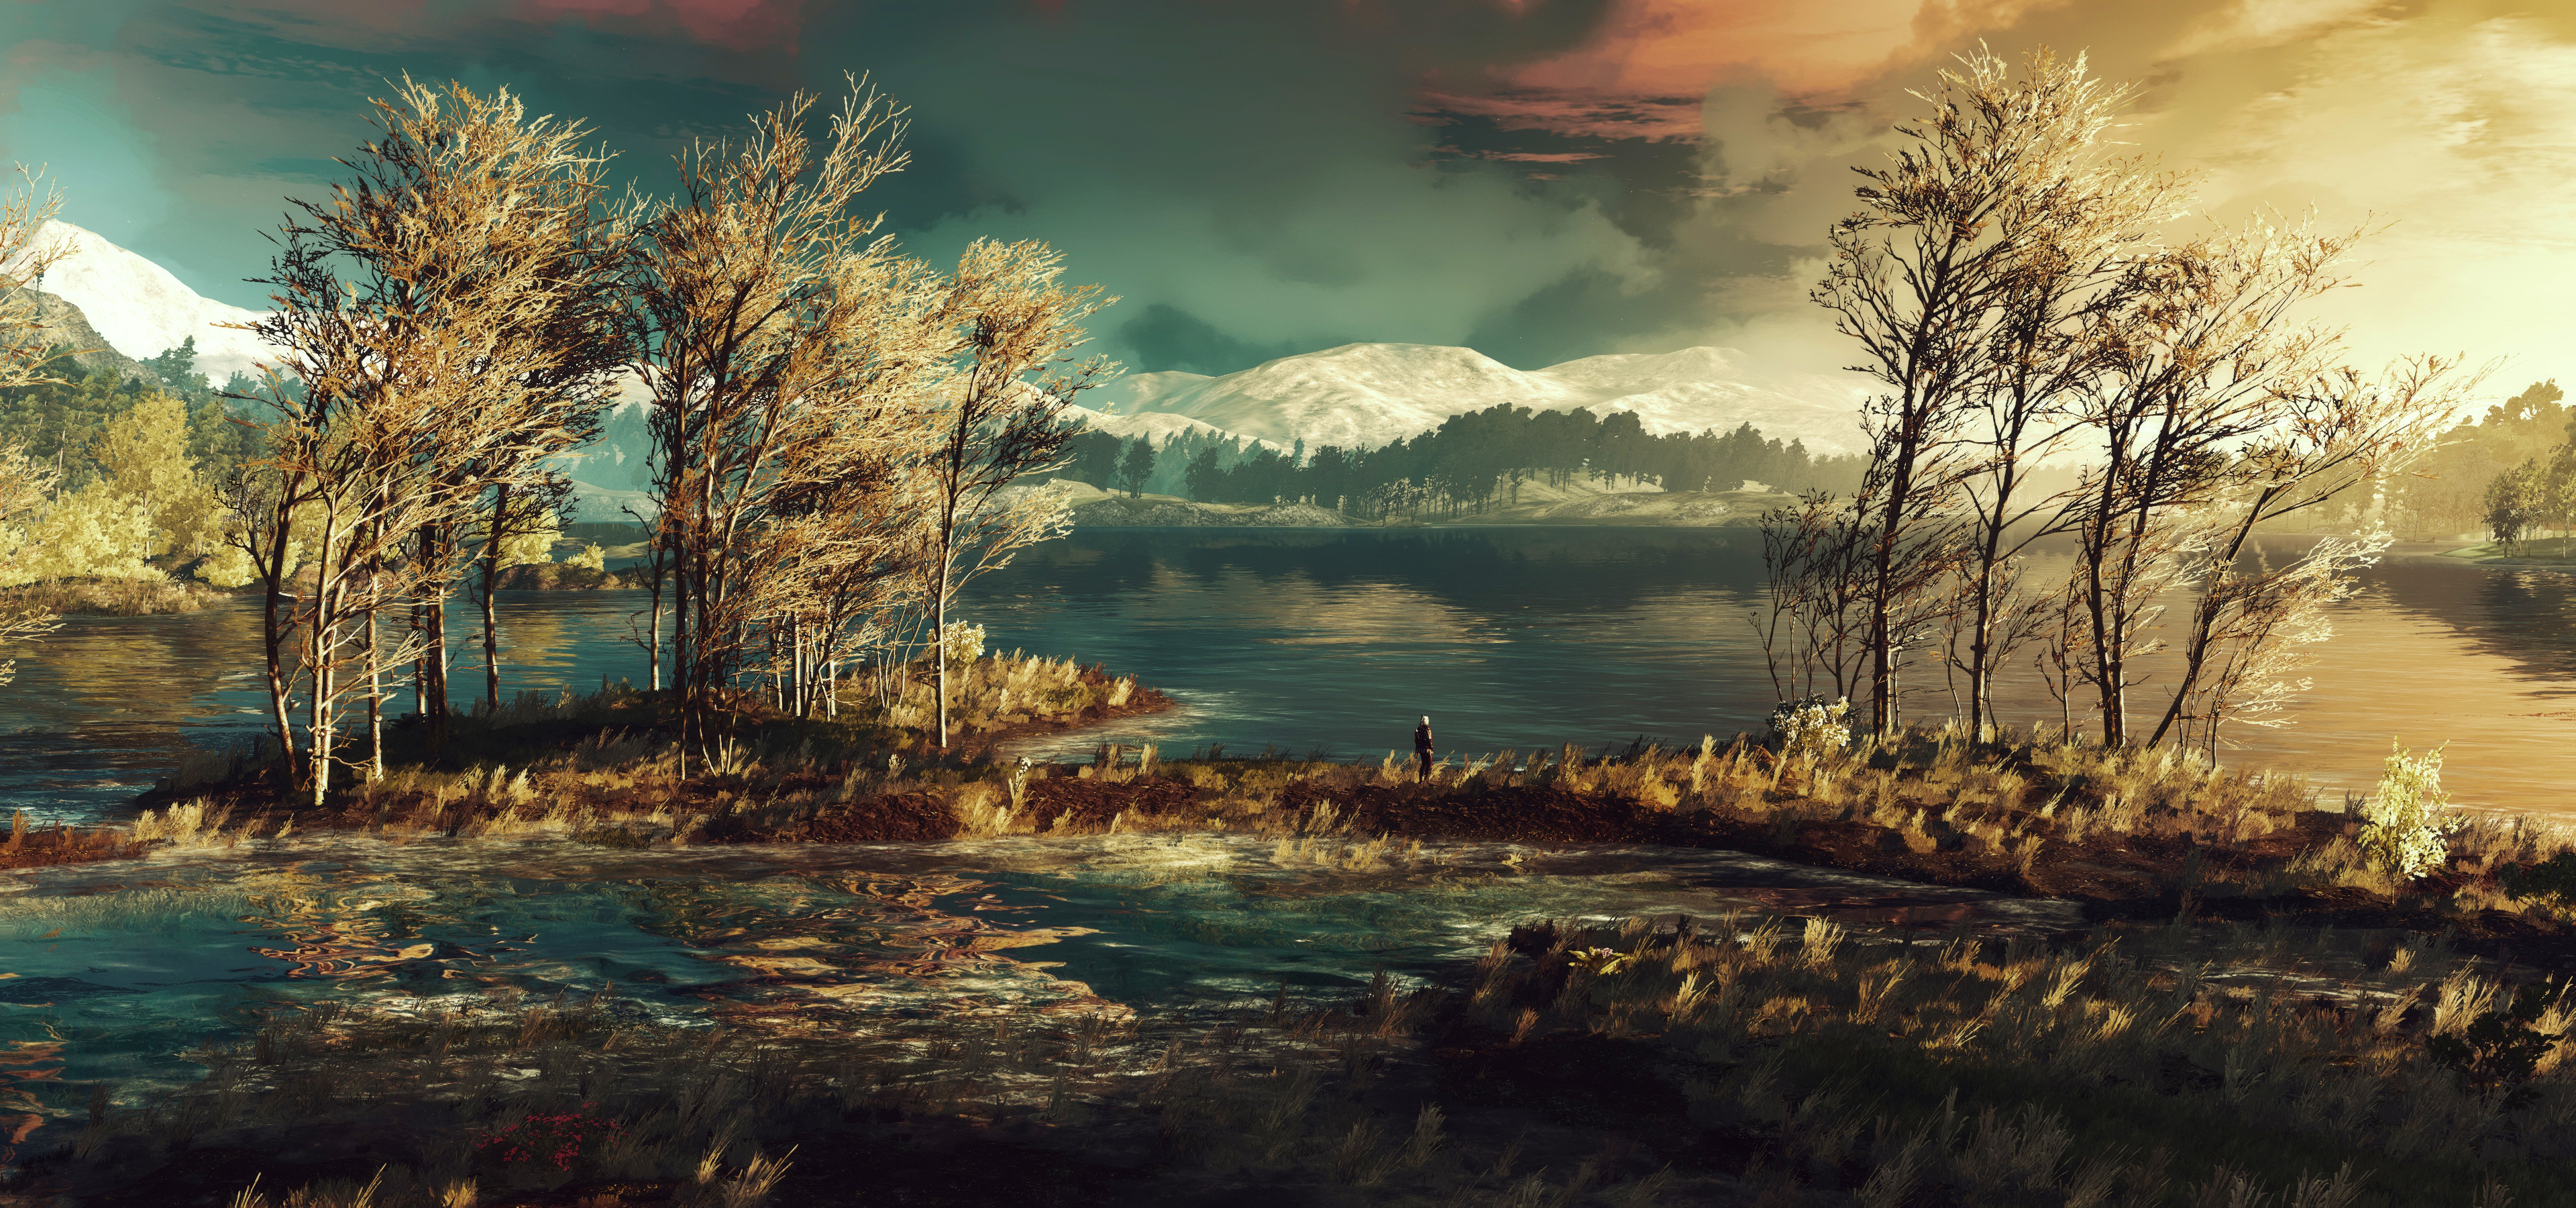 the witcher, video game, landscape, the witcher 3: wild hunt, geralt of rivia